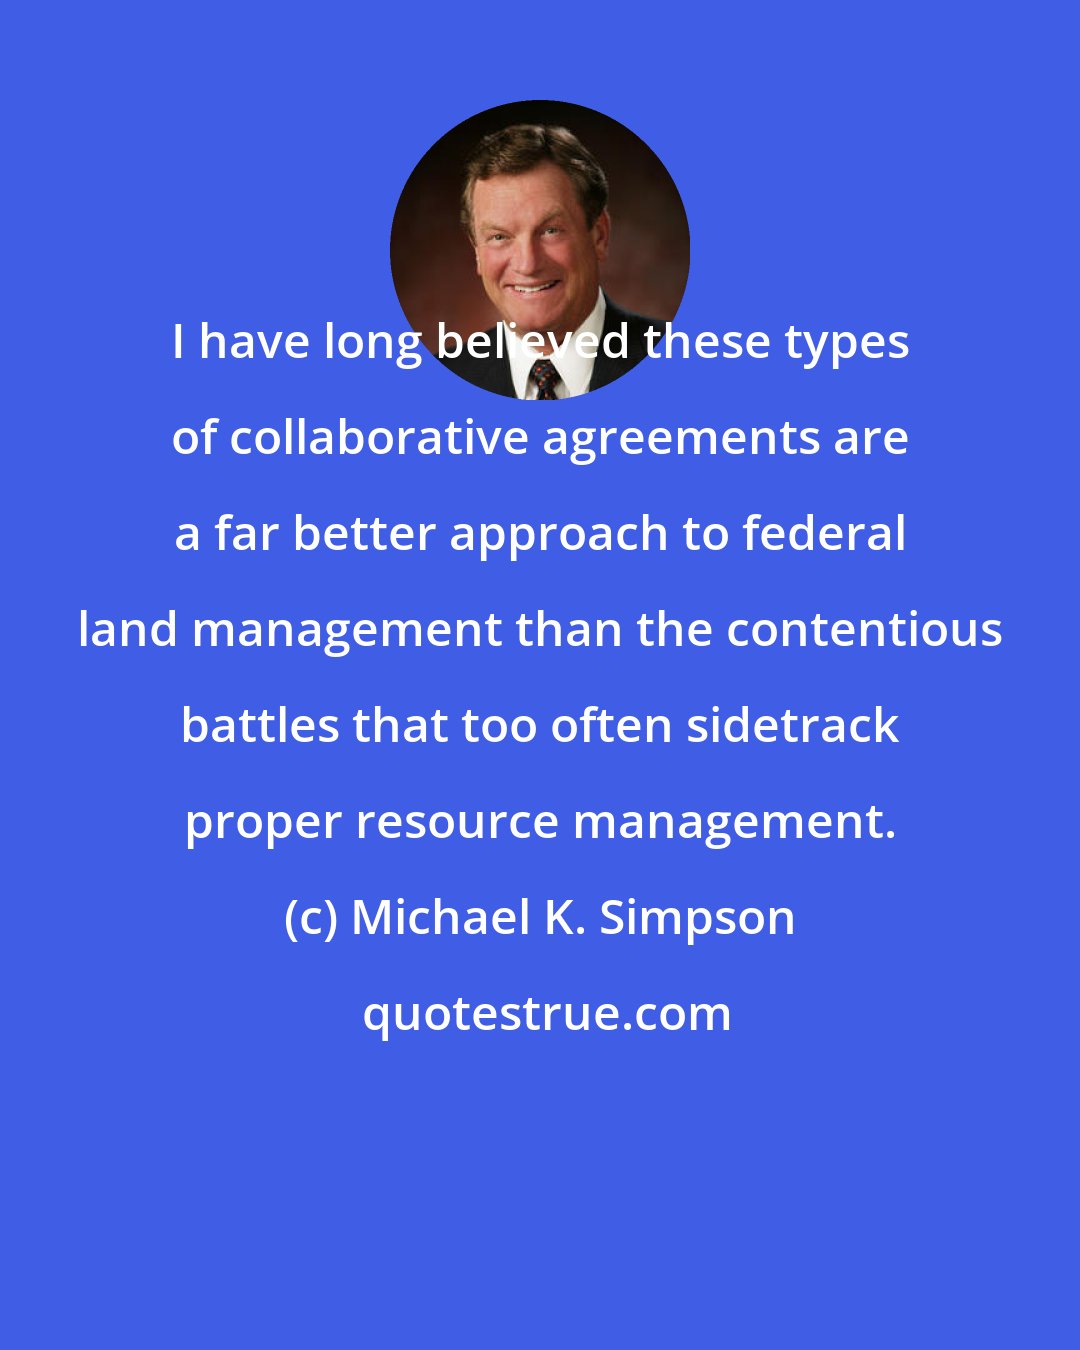 Michael K. Simpson: I have long believed these types of collaborative agreements are a far better approach to federal land management than the contentious battles that too often sidetrack proper resource management.